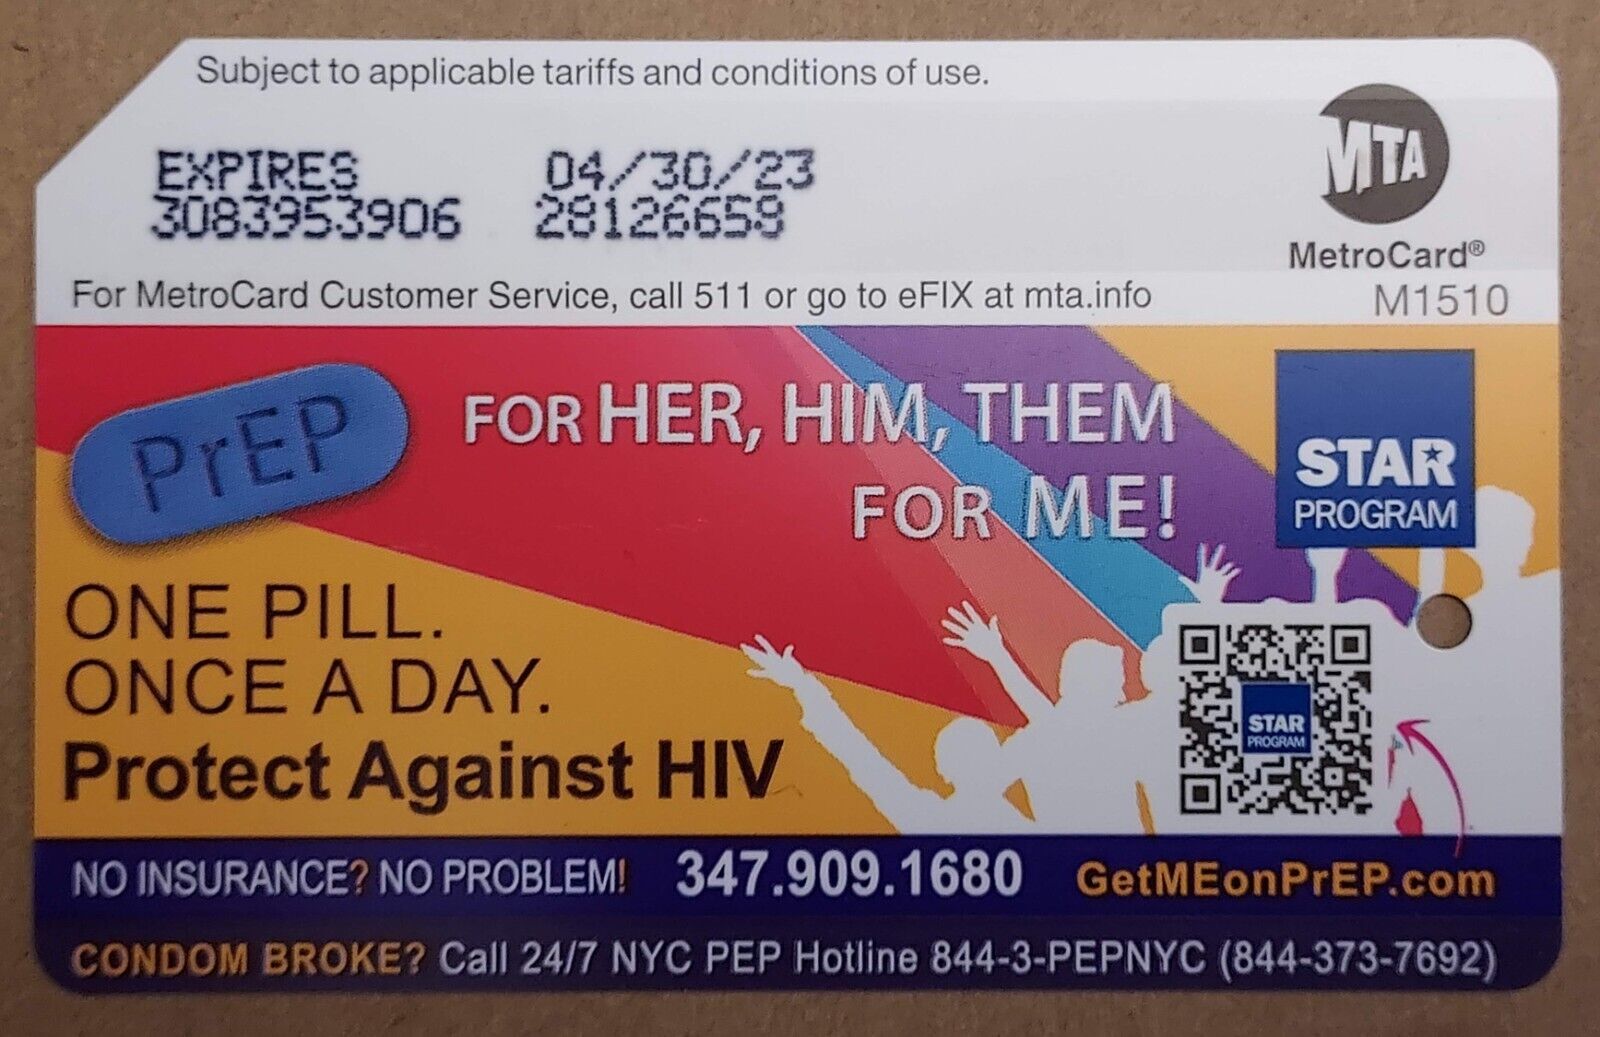 Collectible NYC MetroCard - Expired PrEP HIV Pill ad